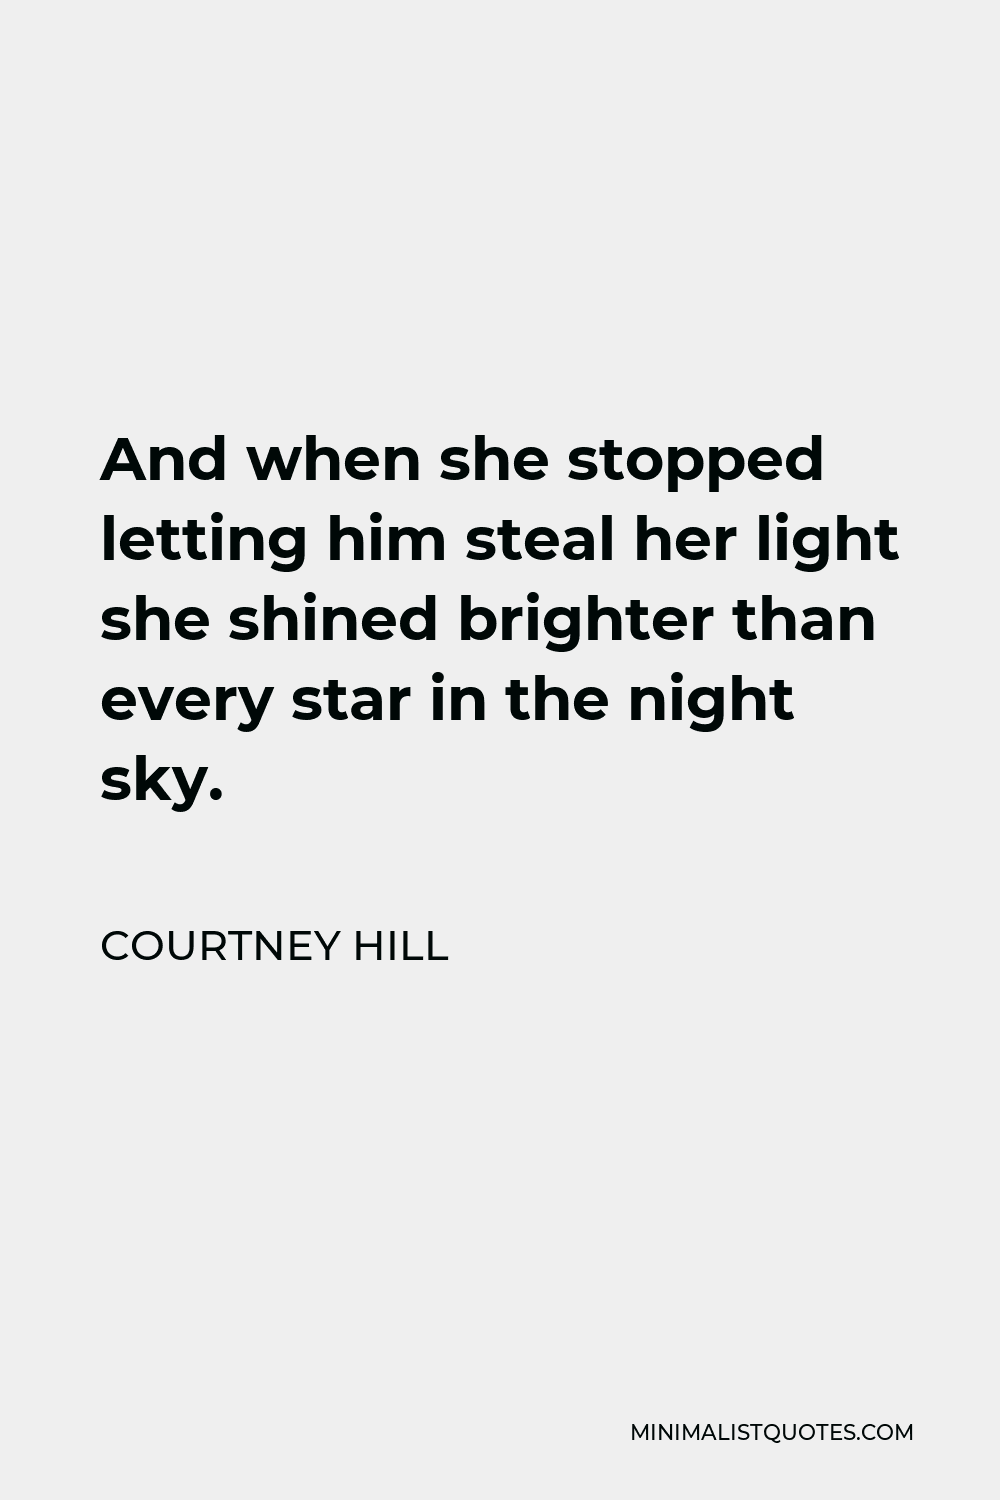 Courtney Hill Quote - And when she stopped letting him steal her light she shined brighter than every star in the night sky.